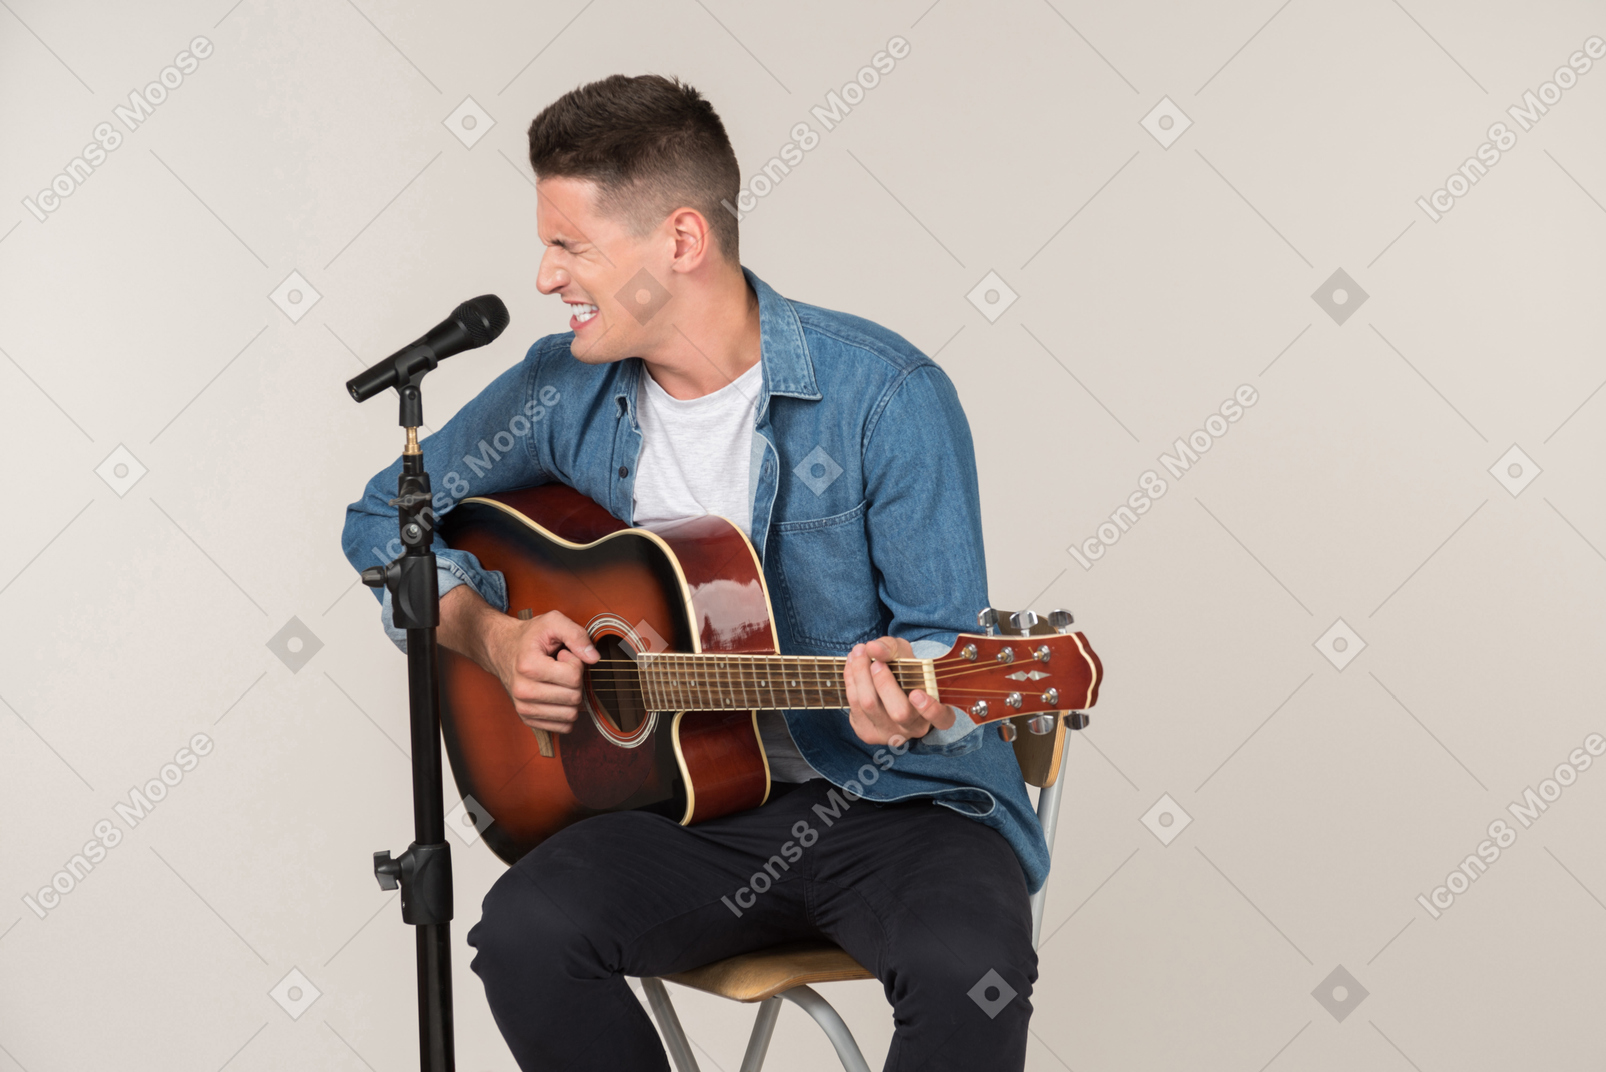 Laughing young guy singing and playing on a guitar